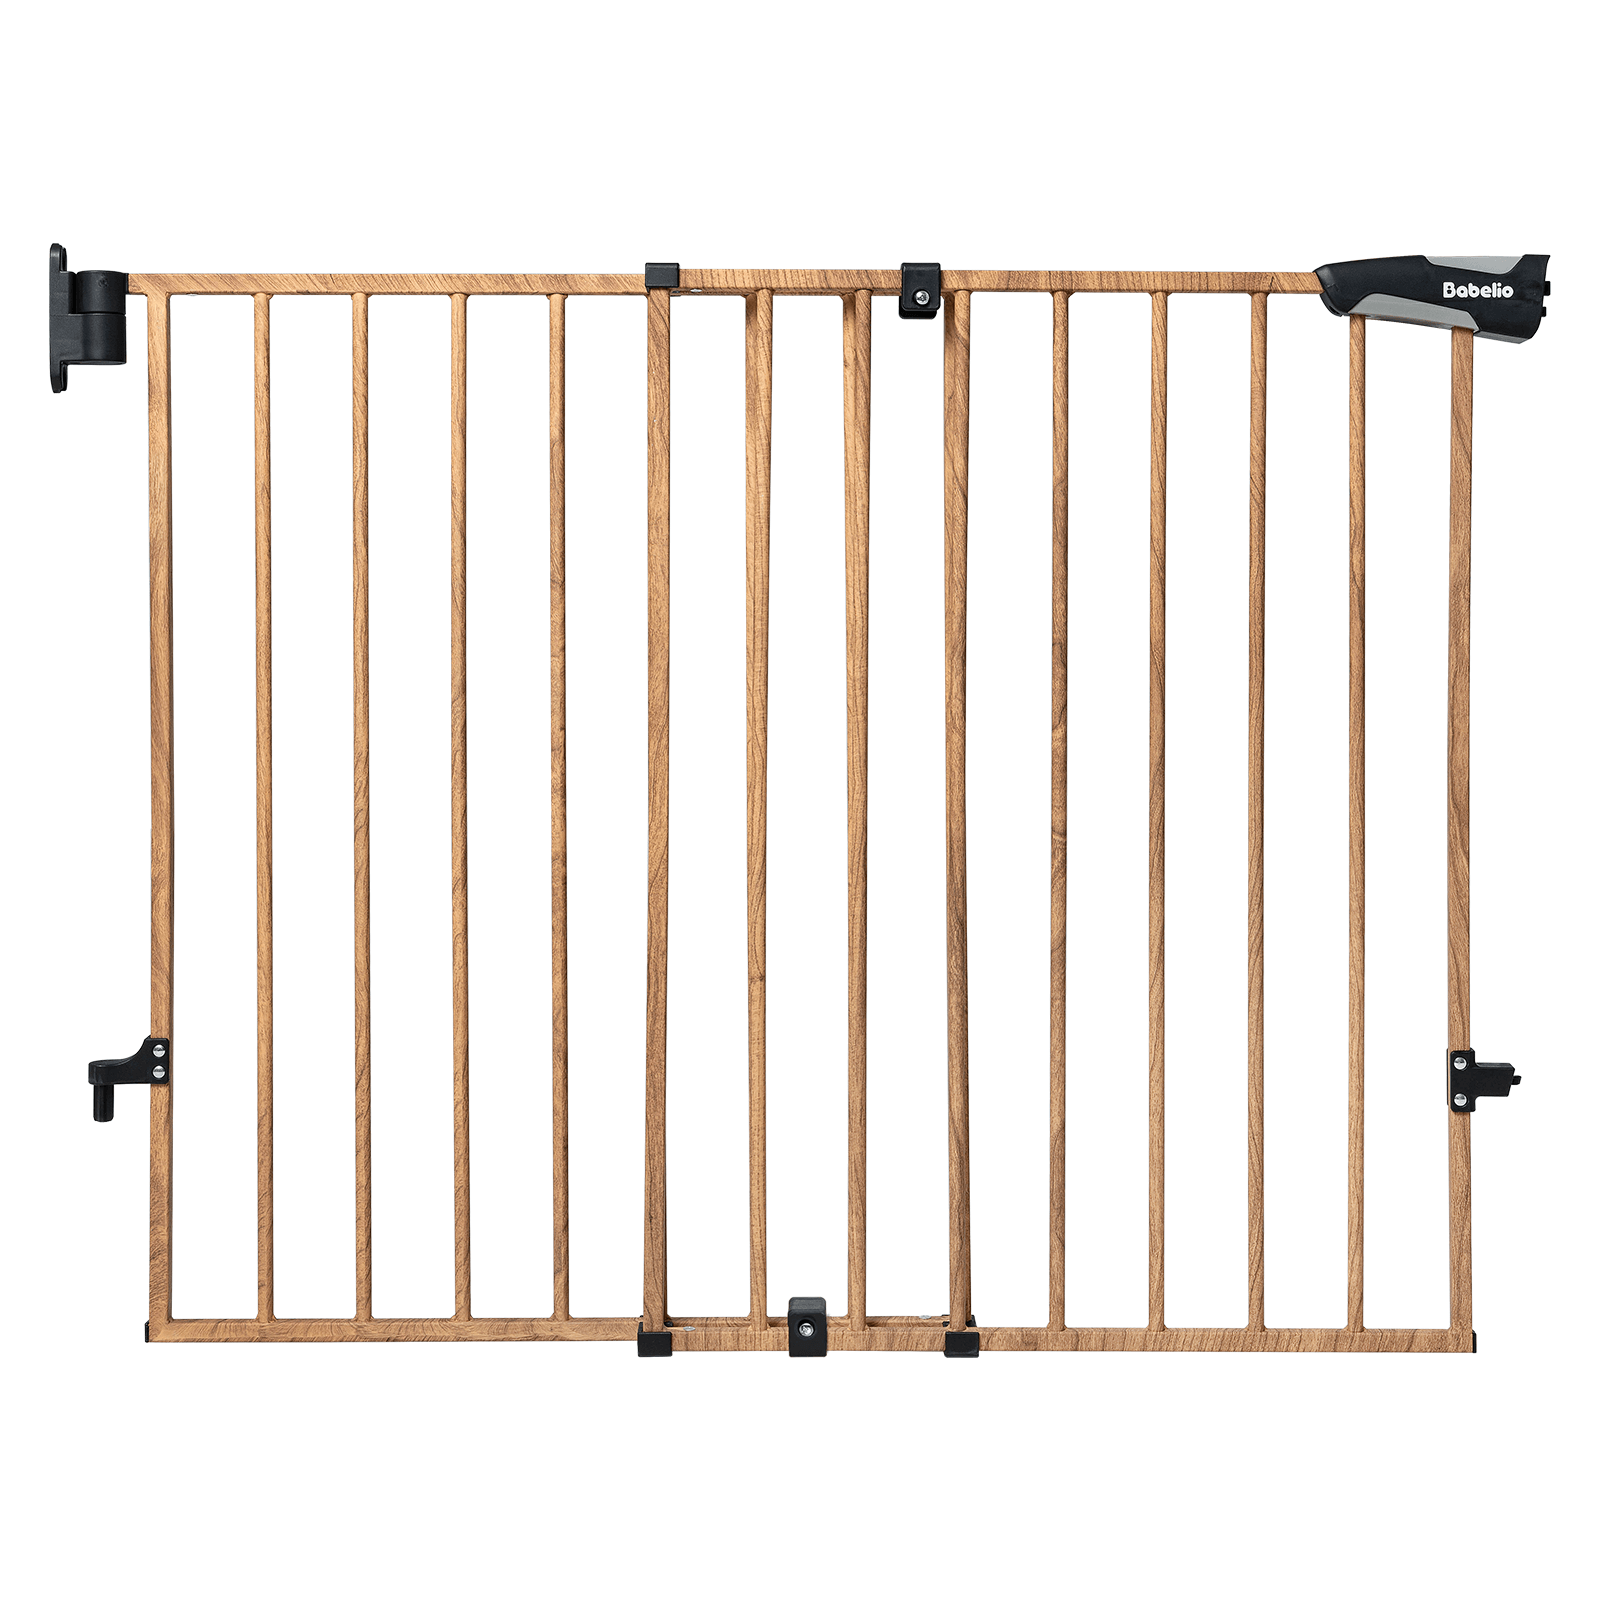 Babelio 2-in-1 No-Threshold 26-43" Metal Safety Gate with Auto-Close Walk-Thru Door – Ideal for Baby and Pet, Wood Pattern